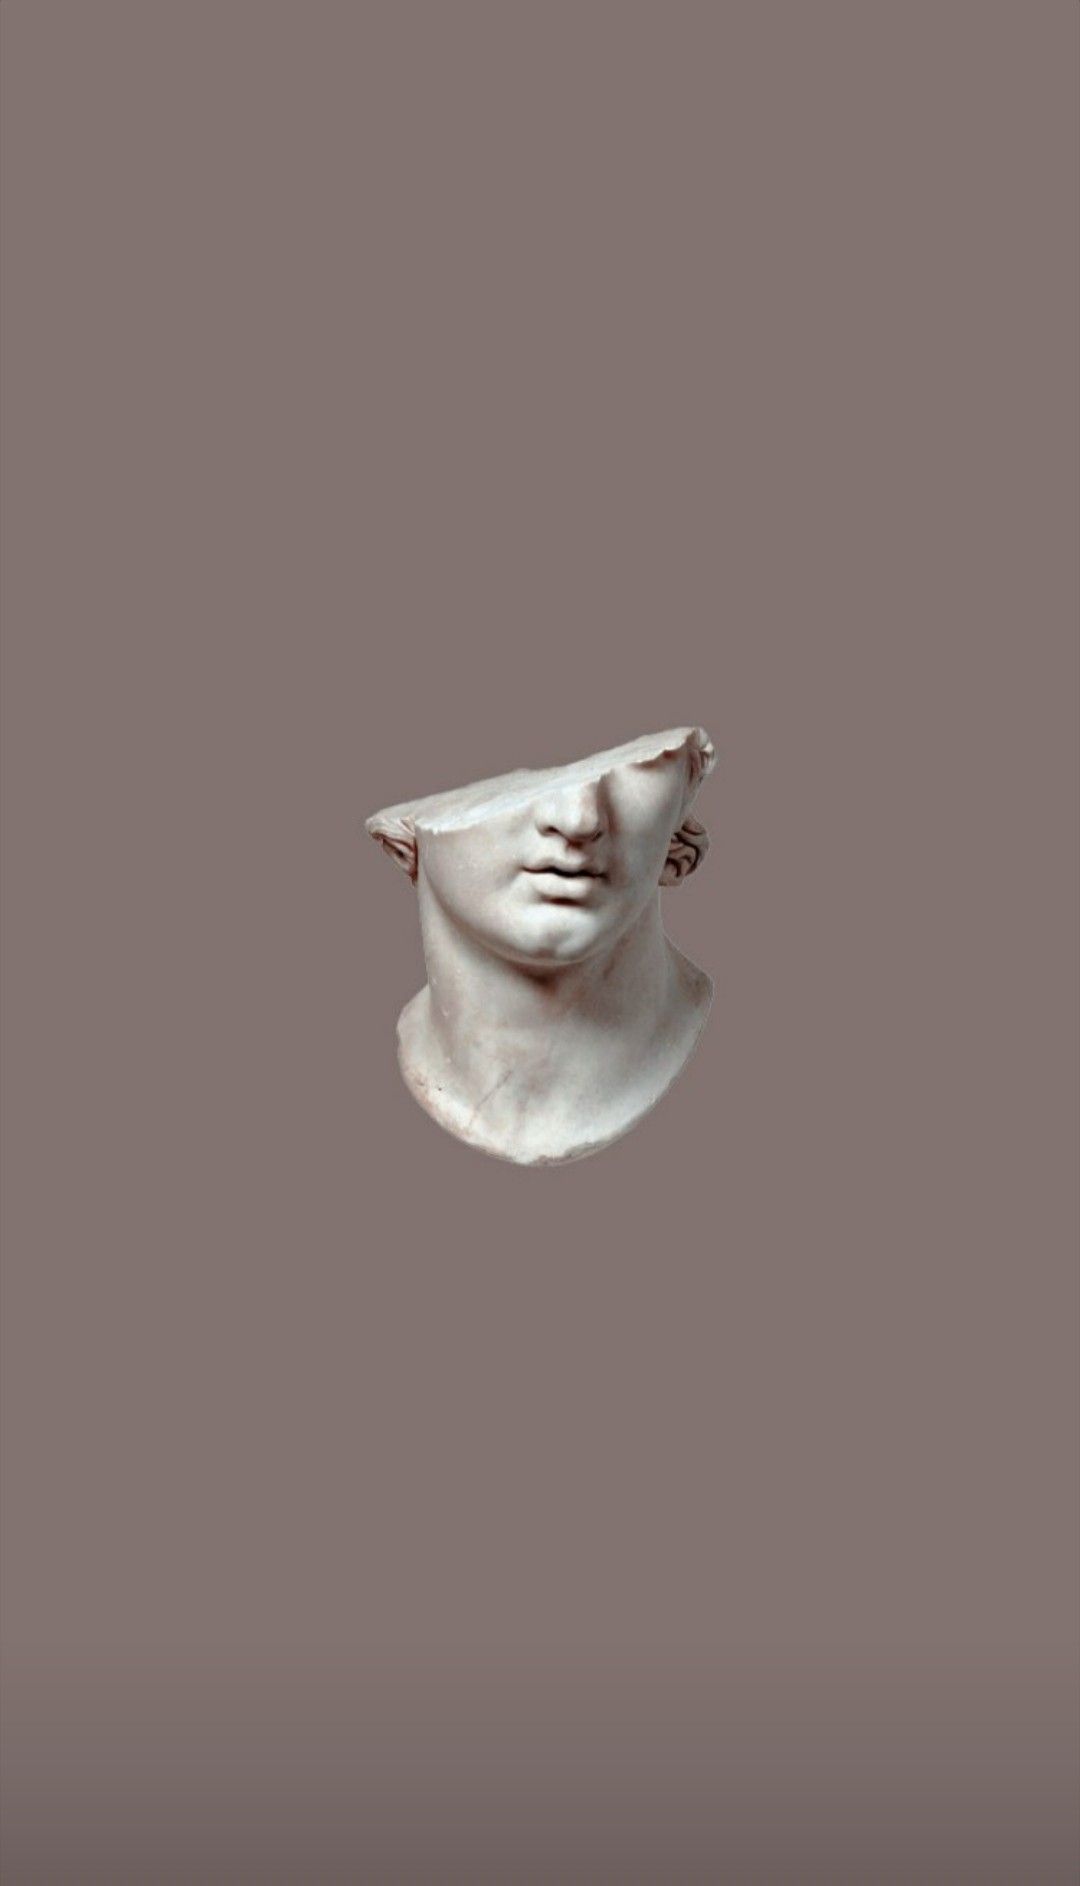 A white sculpture of a face on a grey background - Greek statue, statue